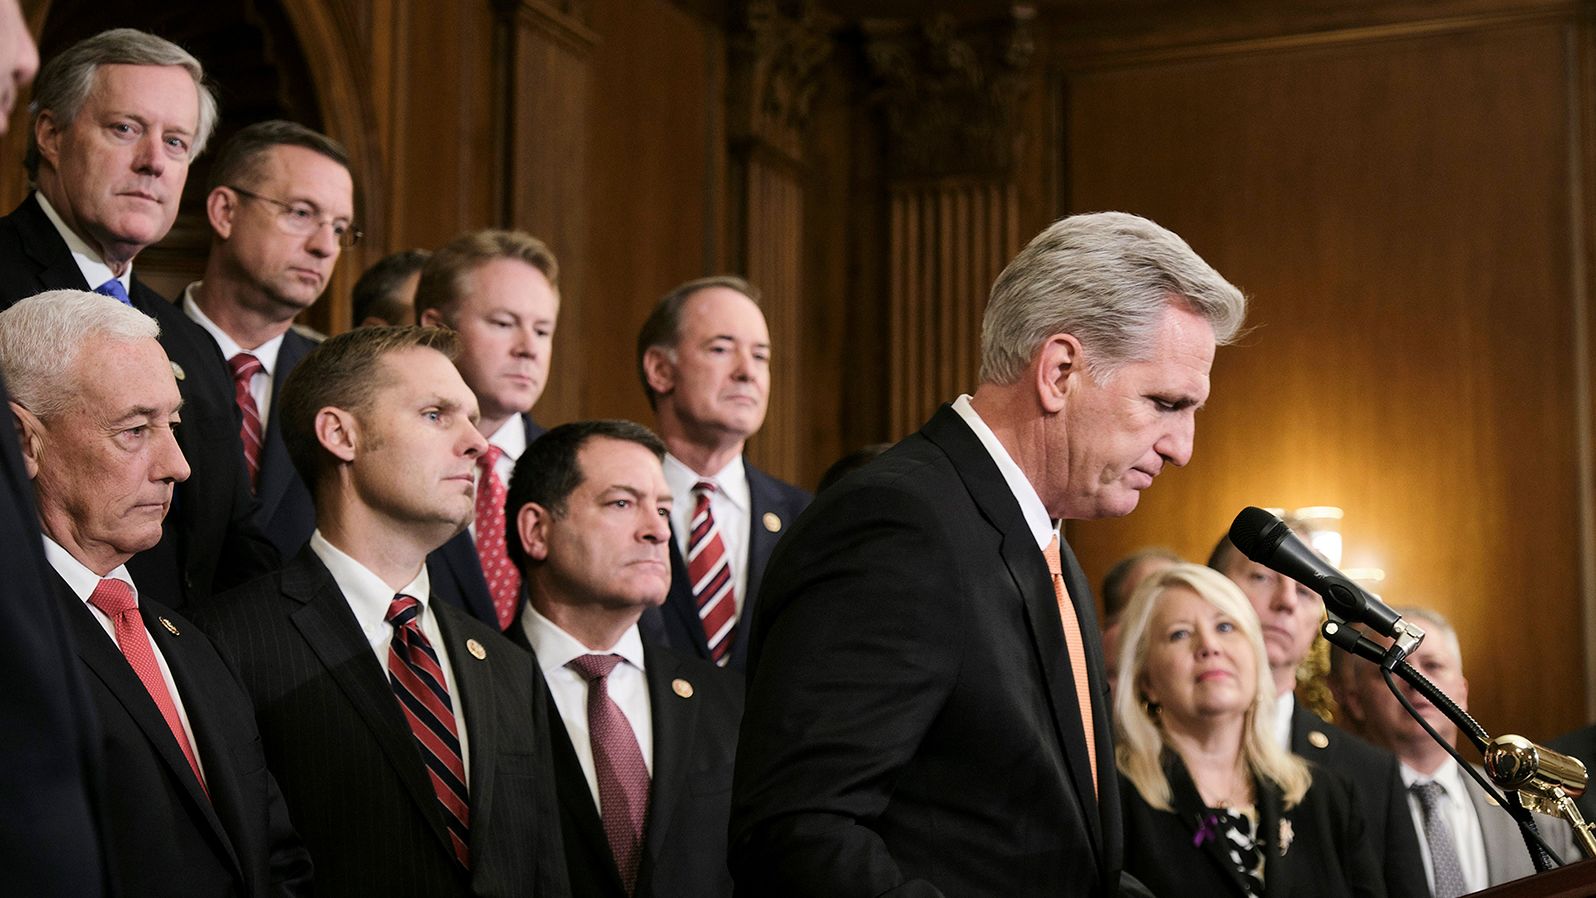 McCarthy leads a news conference at the Capitol in October 2019, after the House voted on a resolution outlining the rules for the next phase of Trump's first impeachment inquiry.